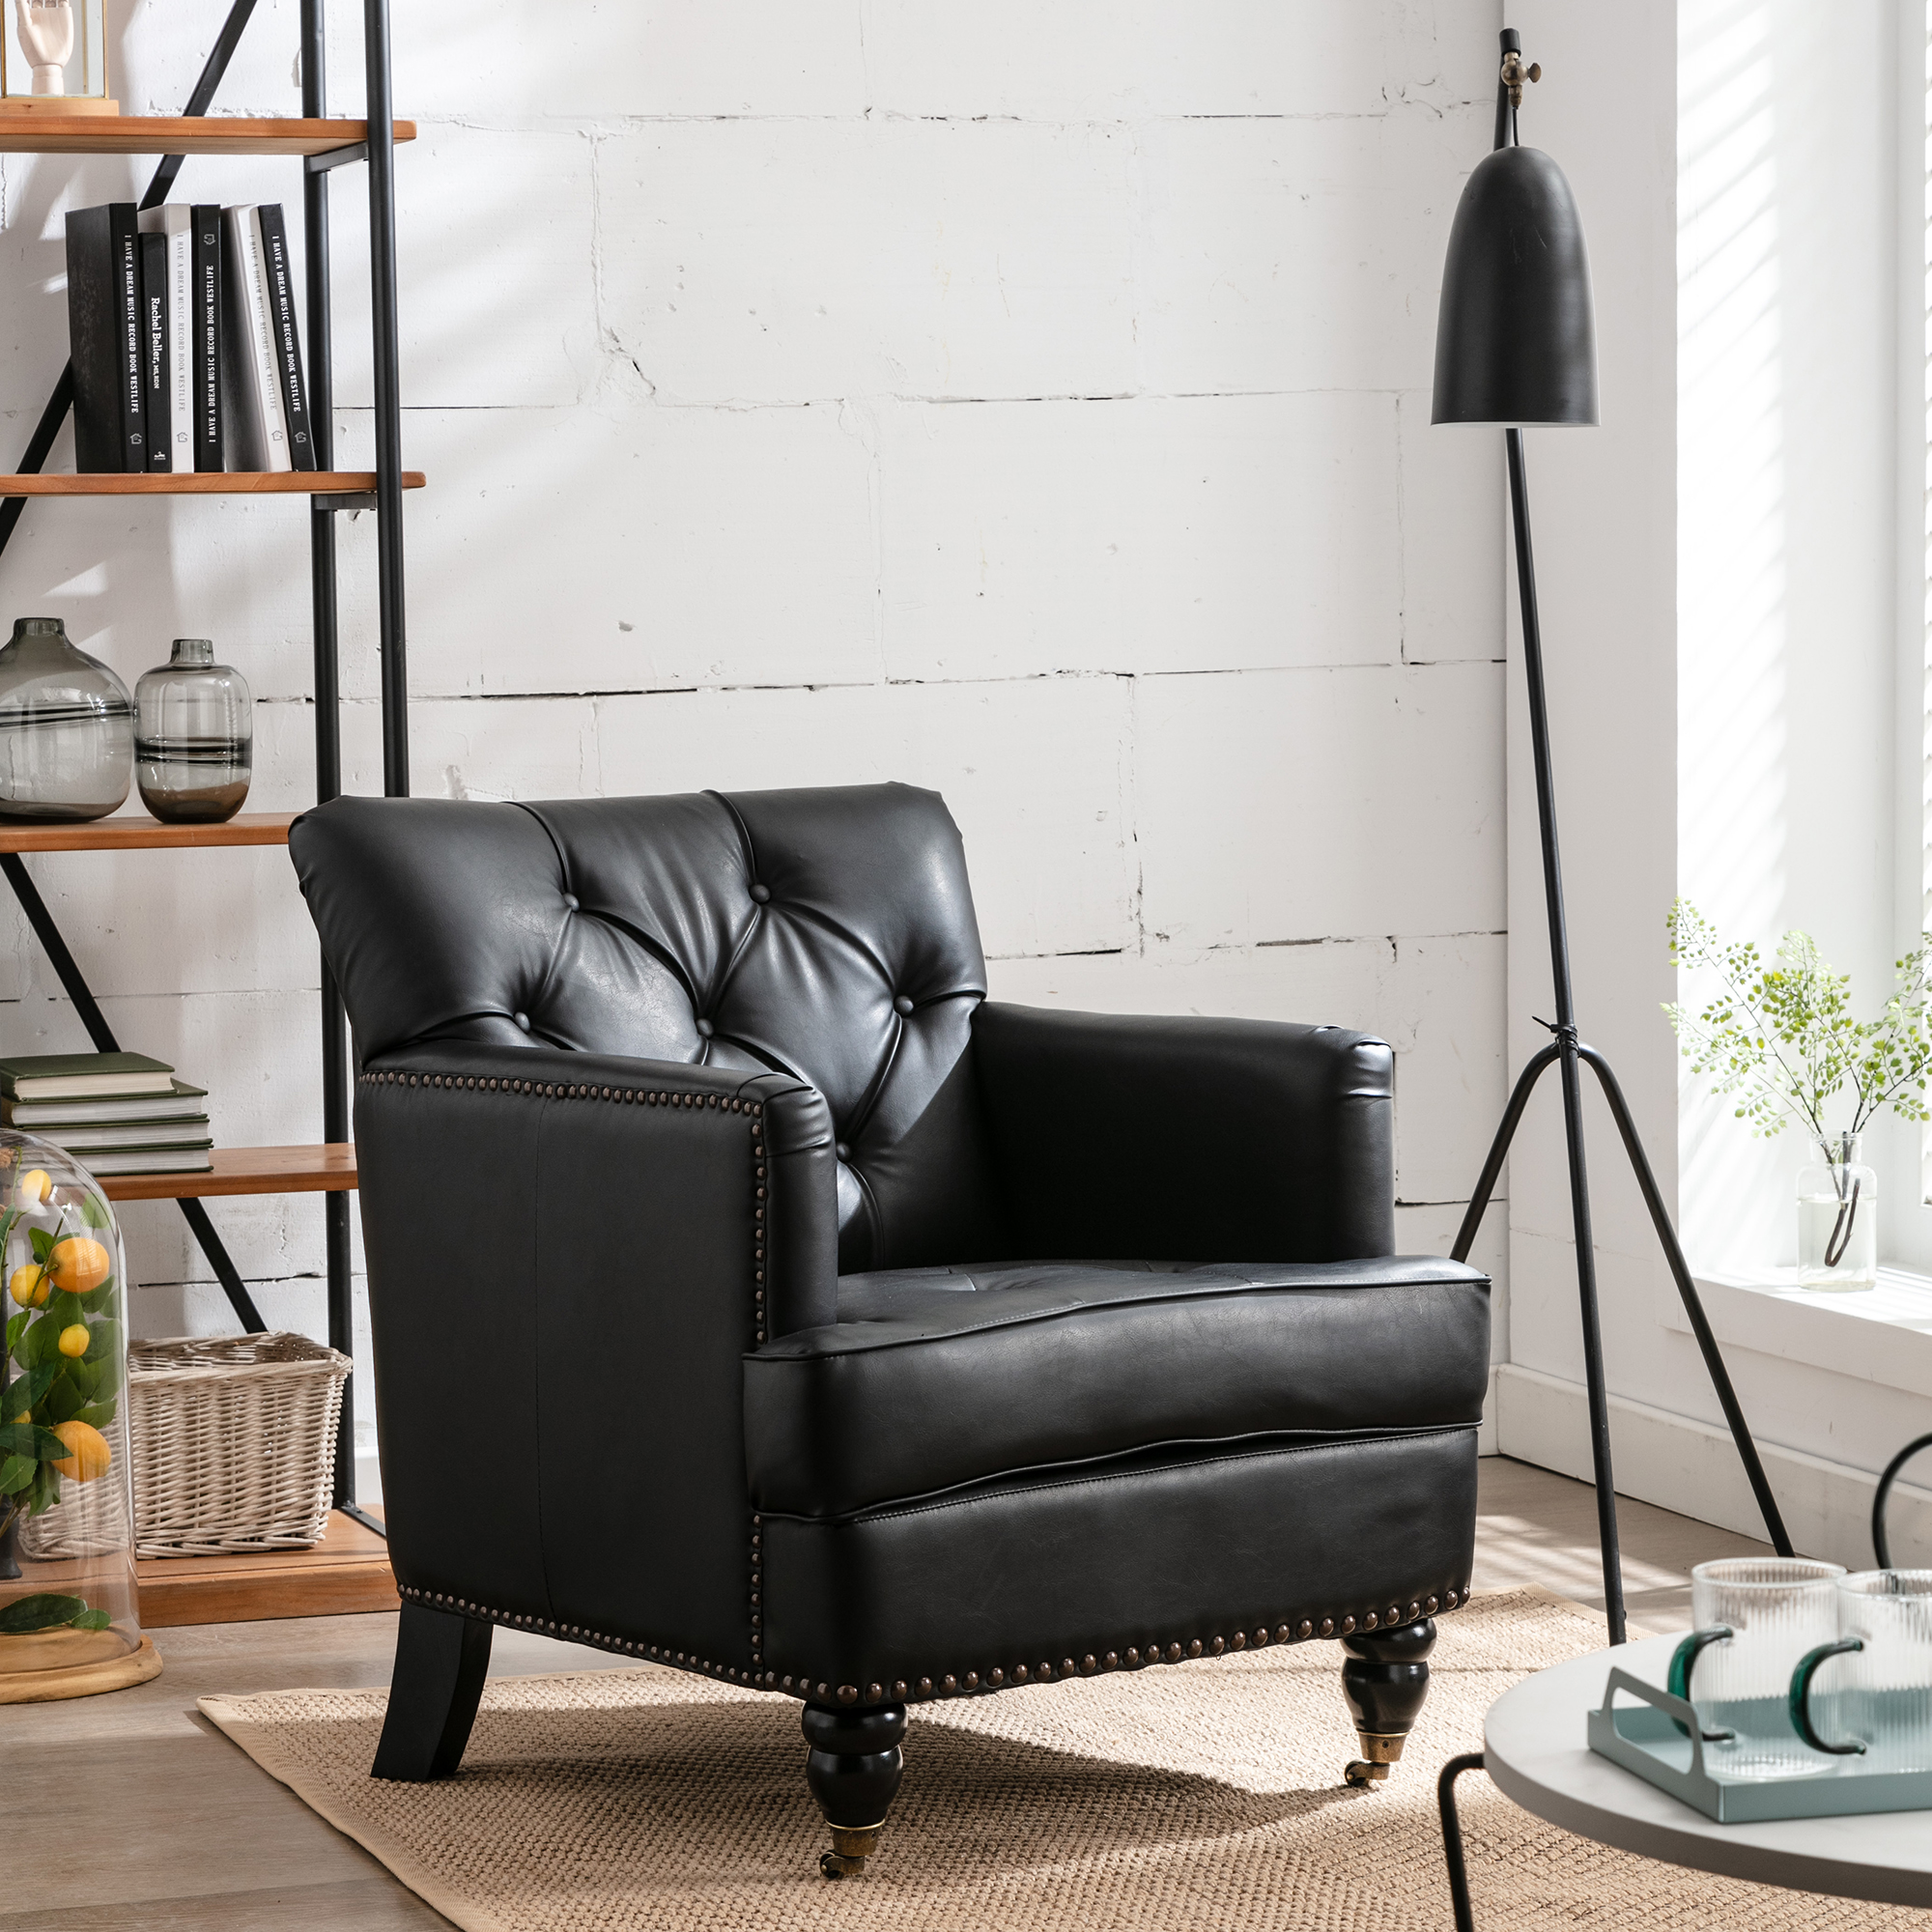 Hengming modern Style  Accent Chair  for Living Room,PU leather club chair ,black-CASAINC